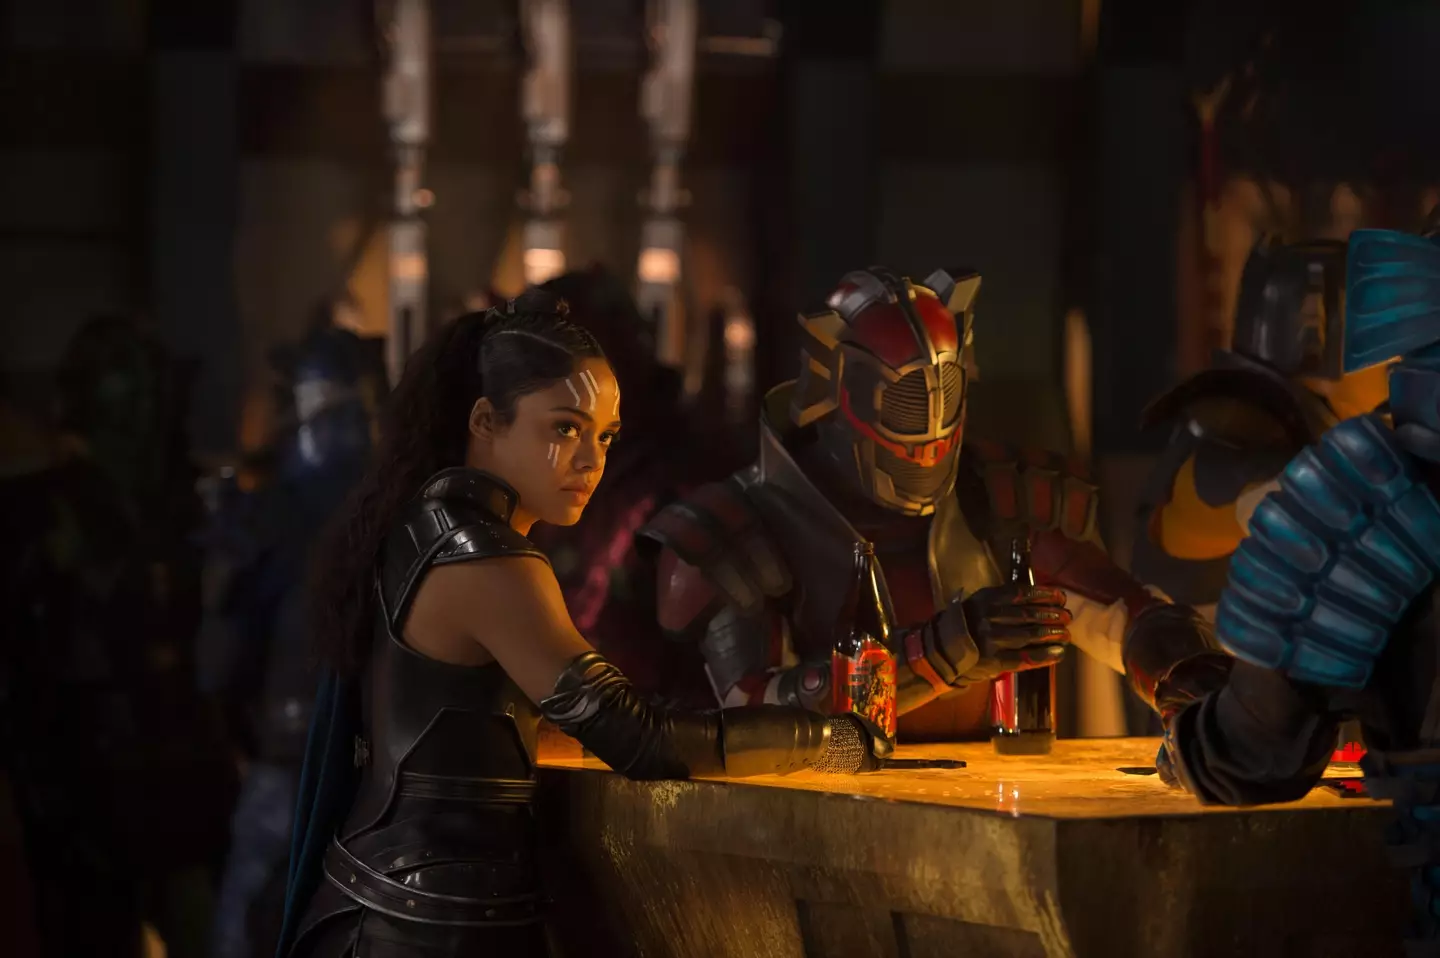 MCU fans criticised how Valkyrie’s bisexuality was portrayed in Thor: Ragnarok.